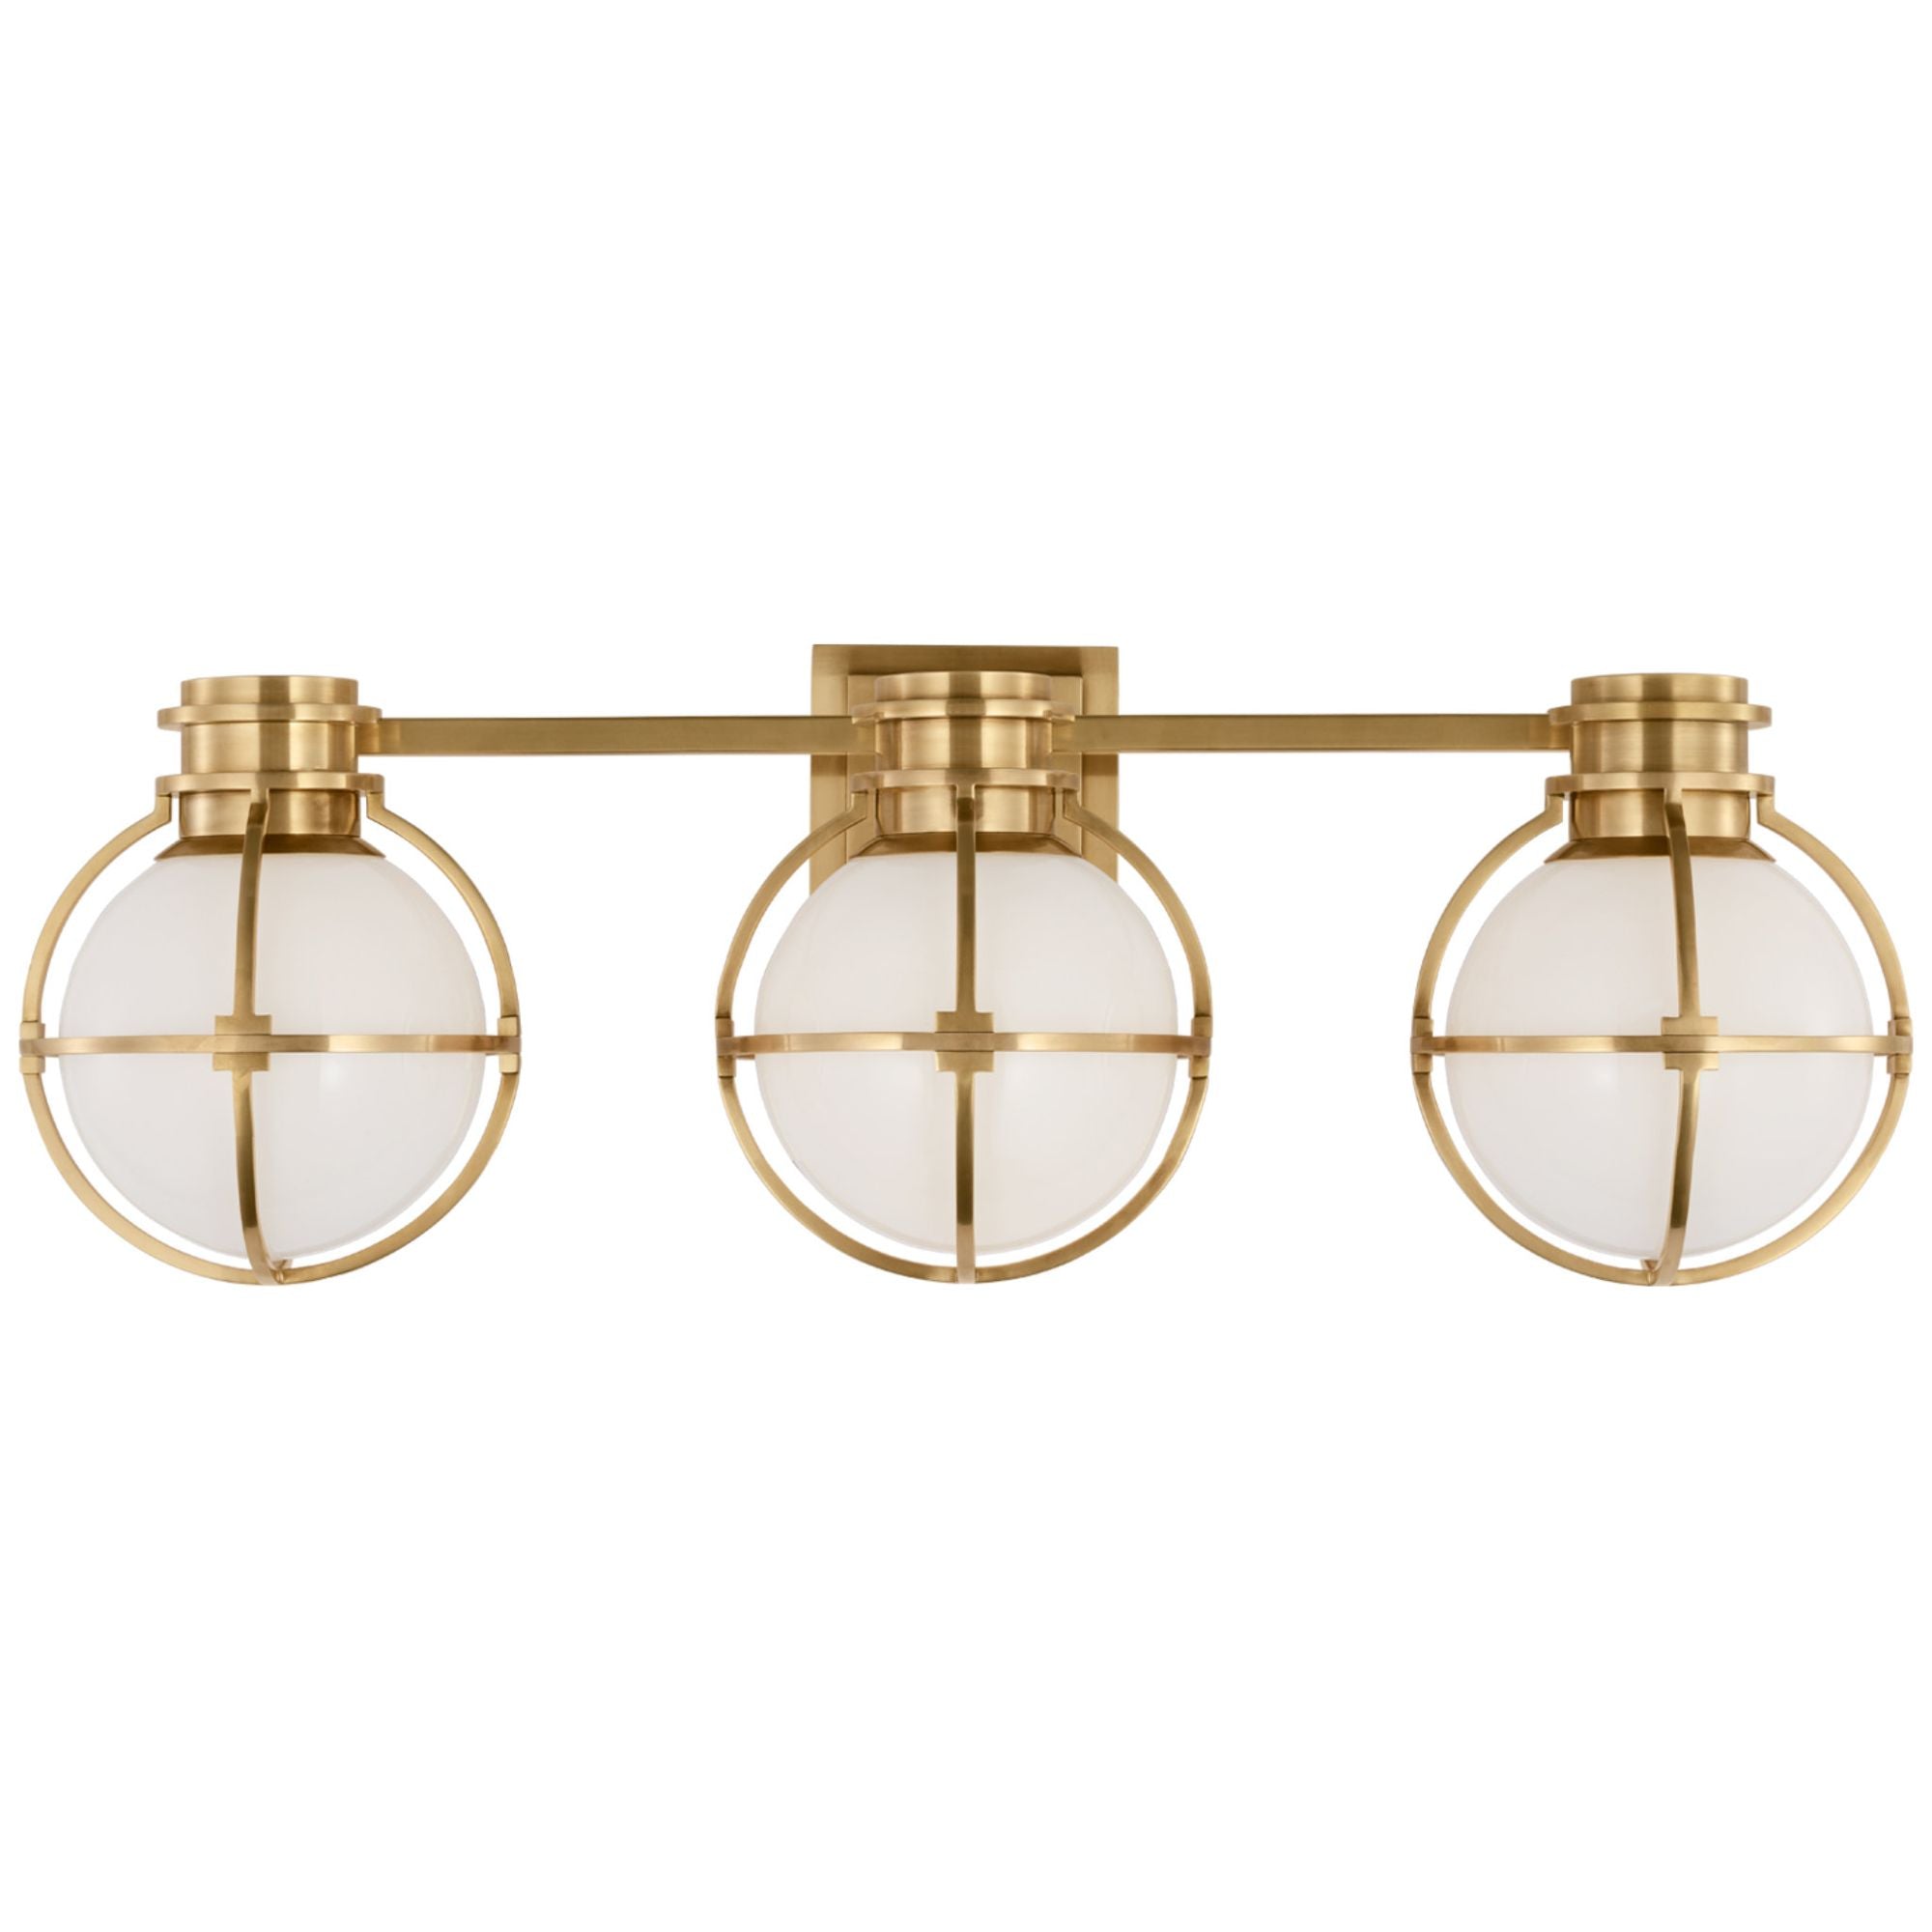 Chapman & Myers Gracie Triple Sconce in Antique-Burnished Brass with White Glass